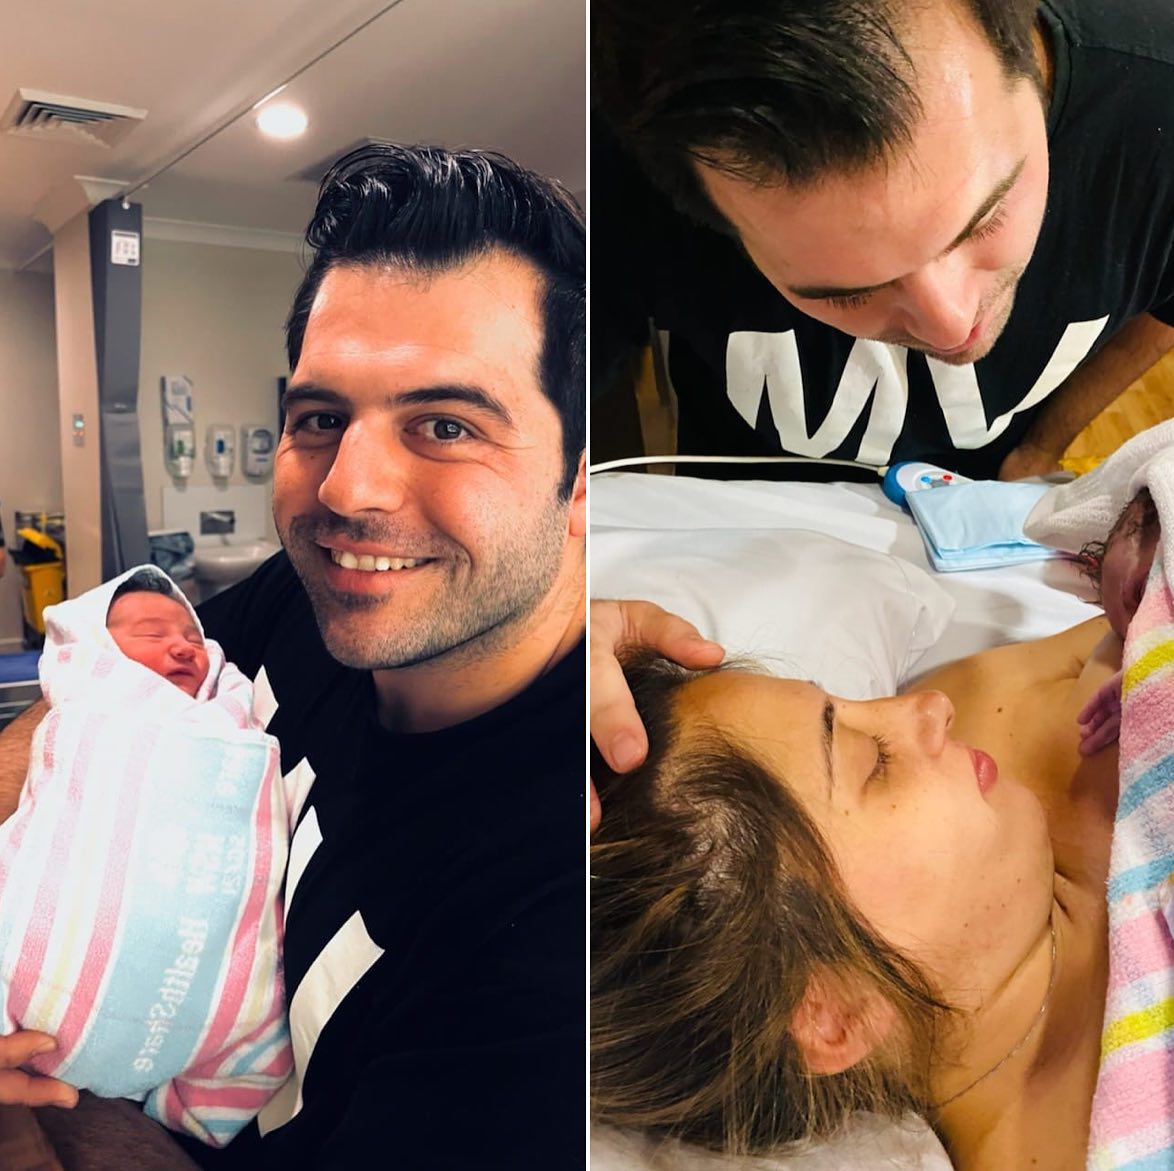 Congrats to @themarkvincent and fam on the new Bub. So happy for y’all.